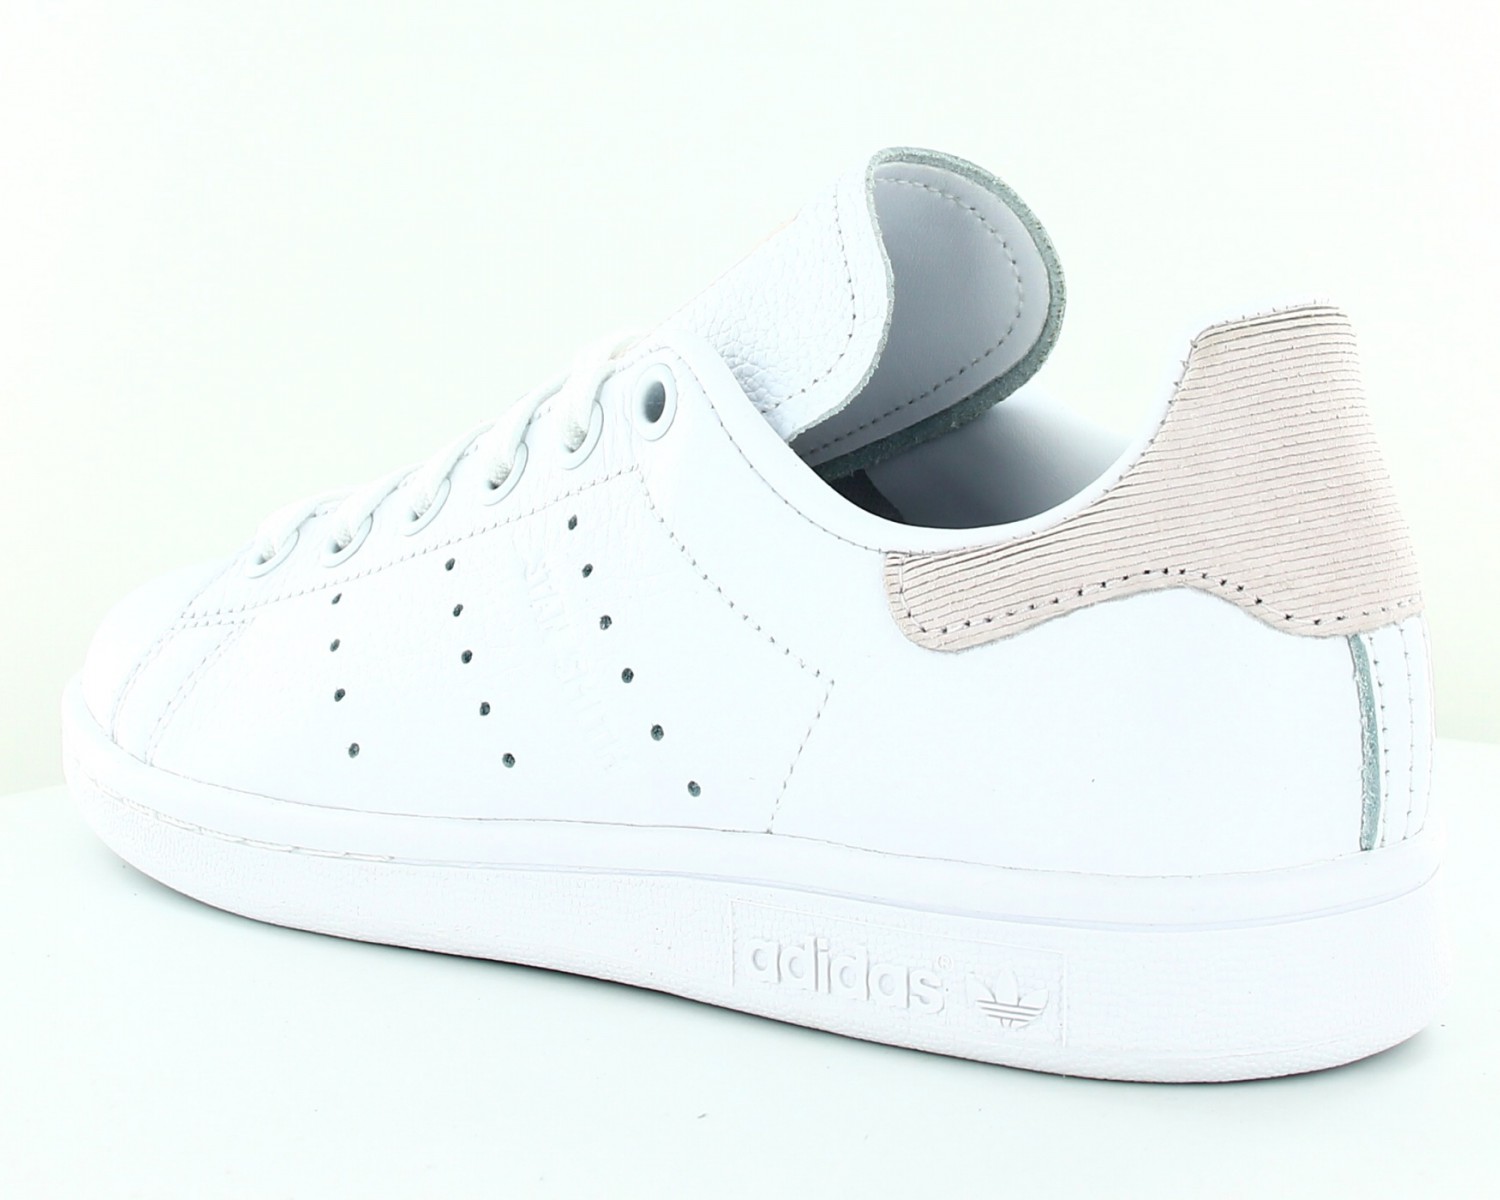 stan smith rose et blanche